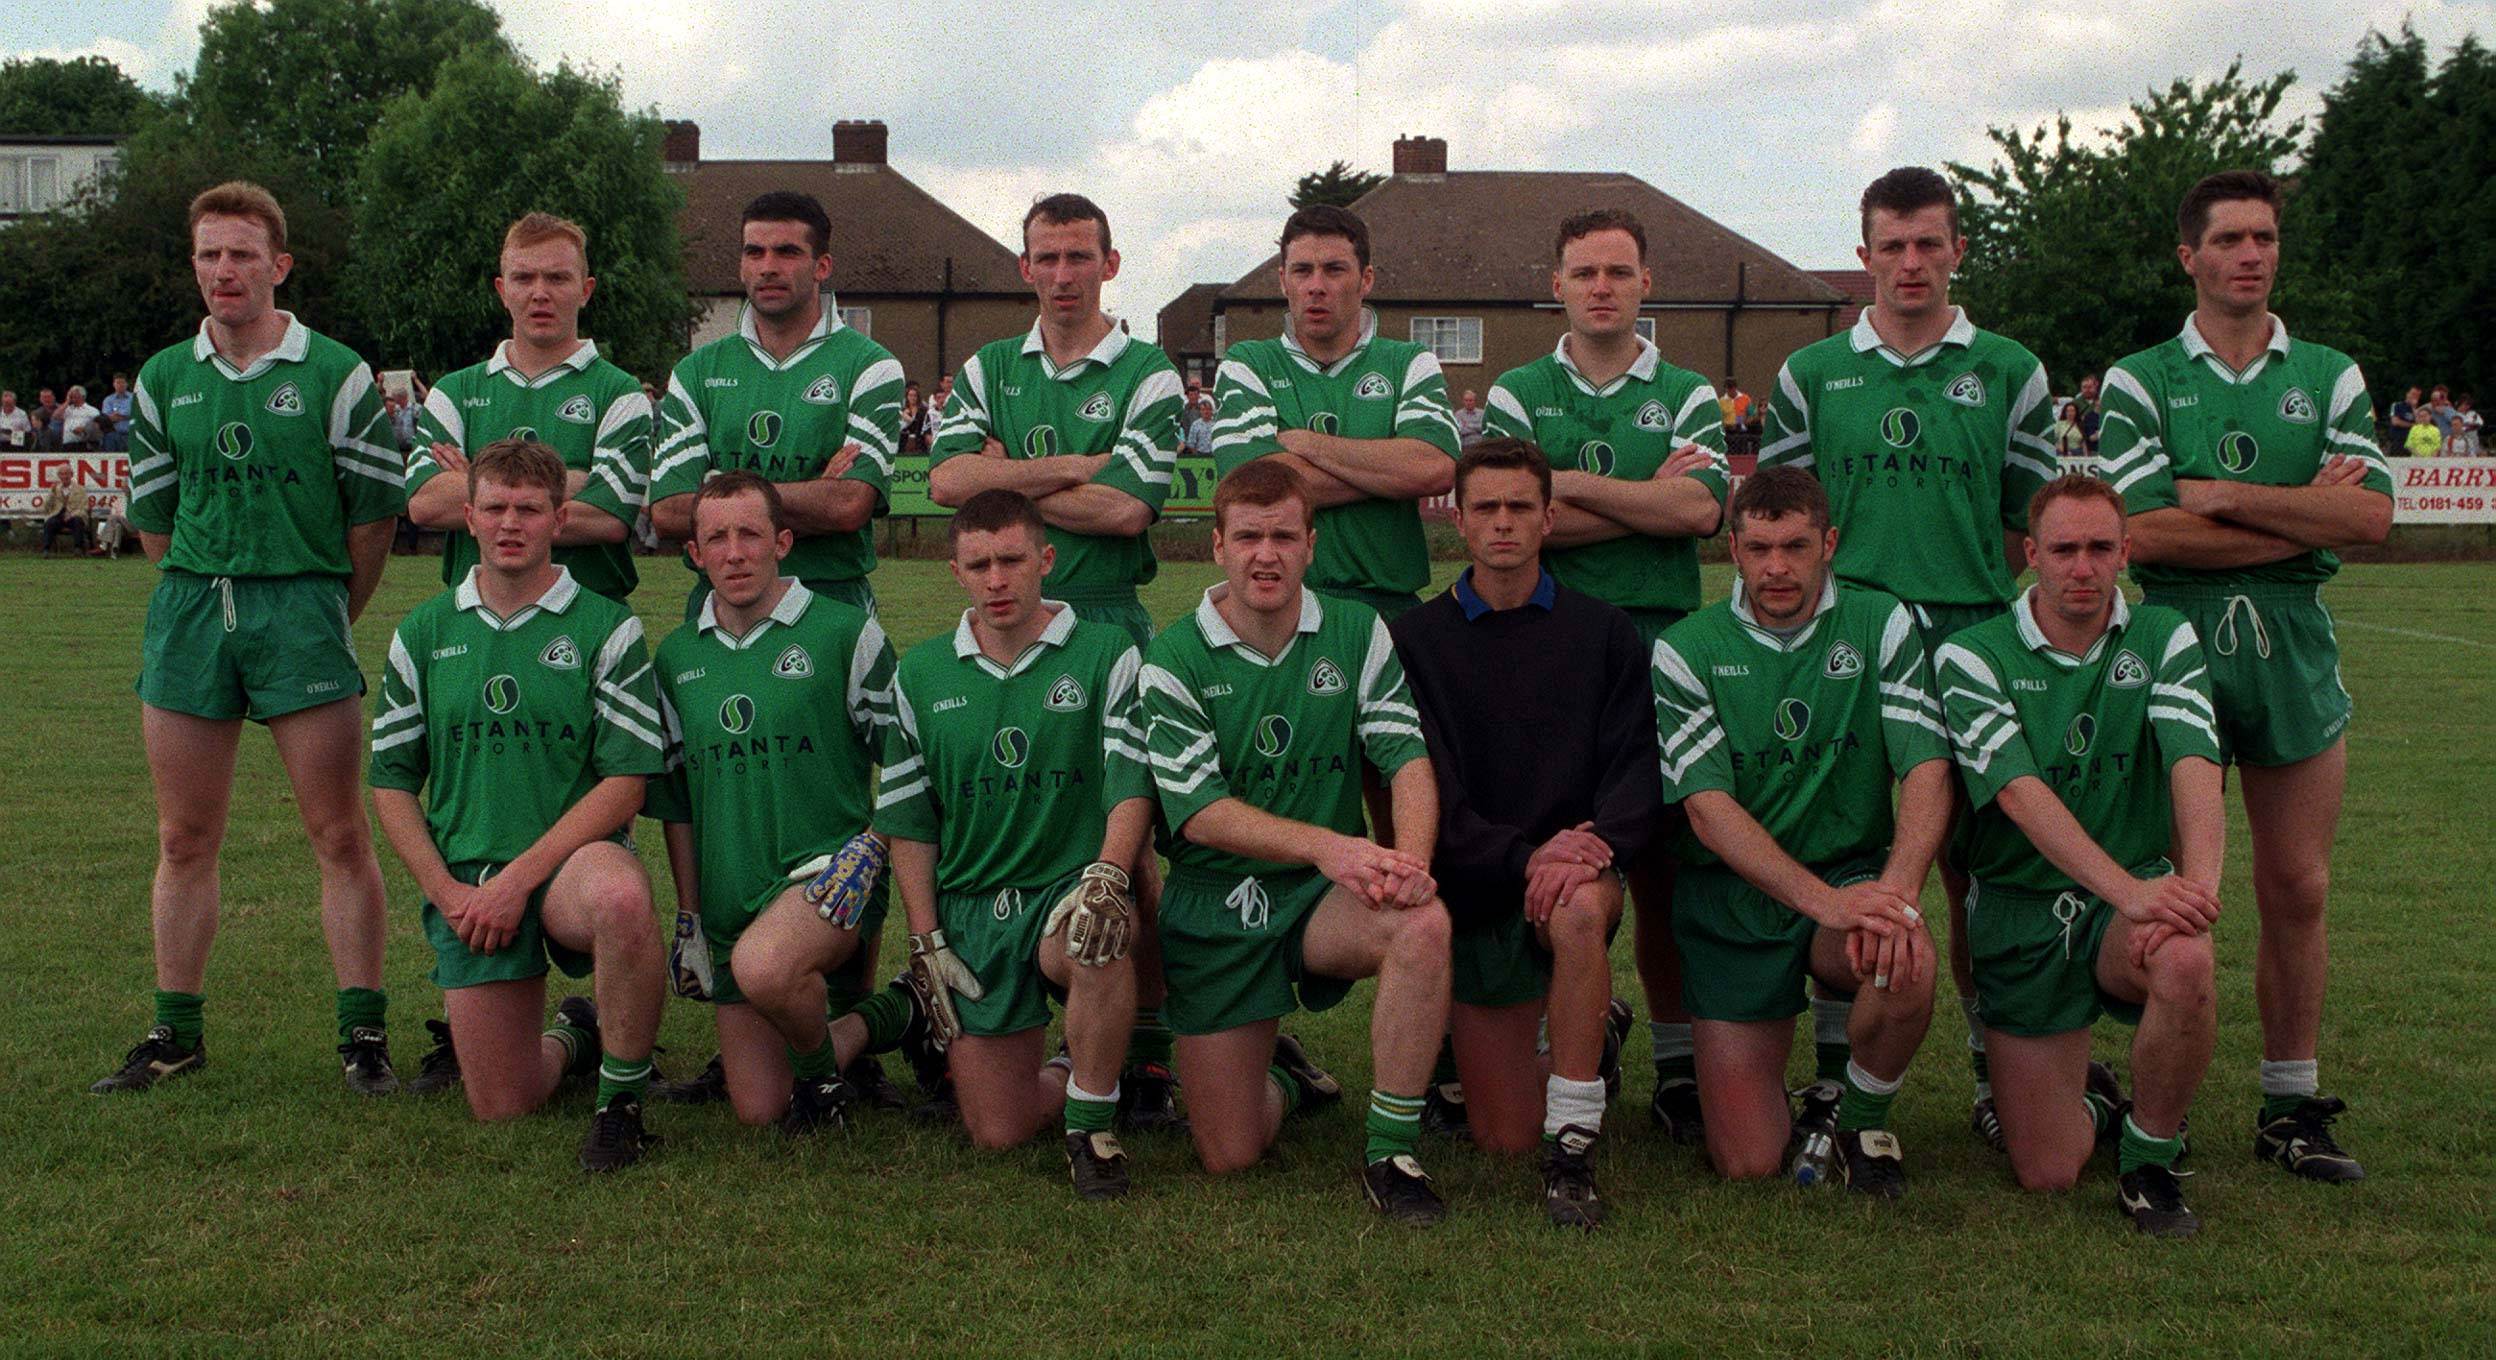  St Clarets GFC London. The best GAA club in London. Join us if you want to play Gaelic football in London 